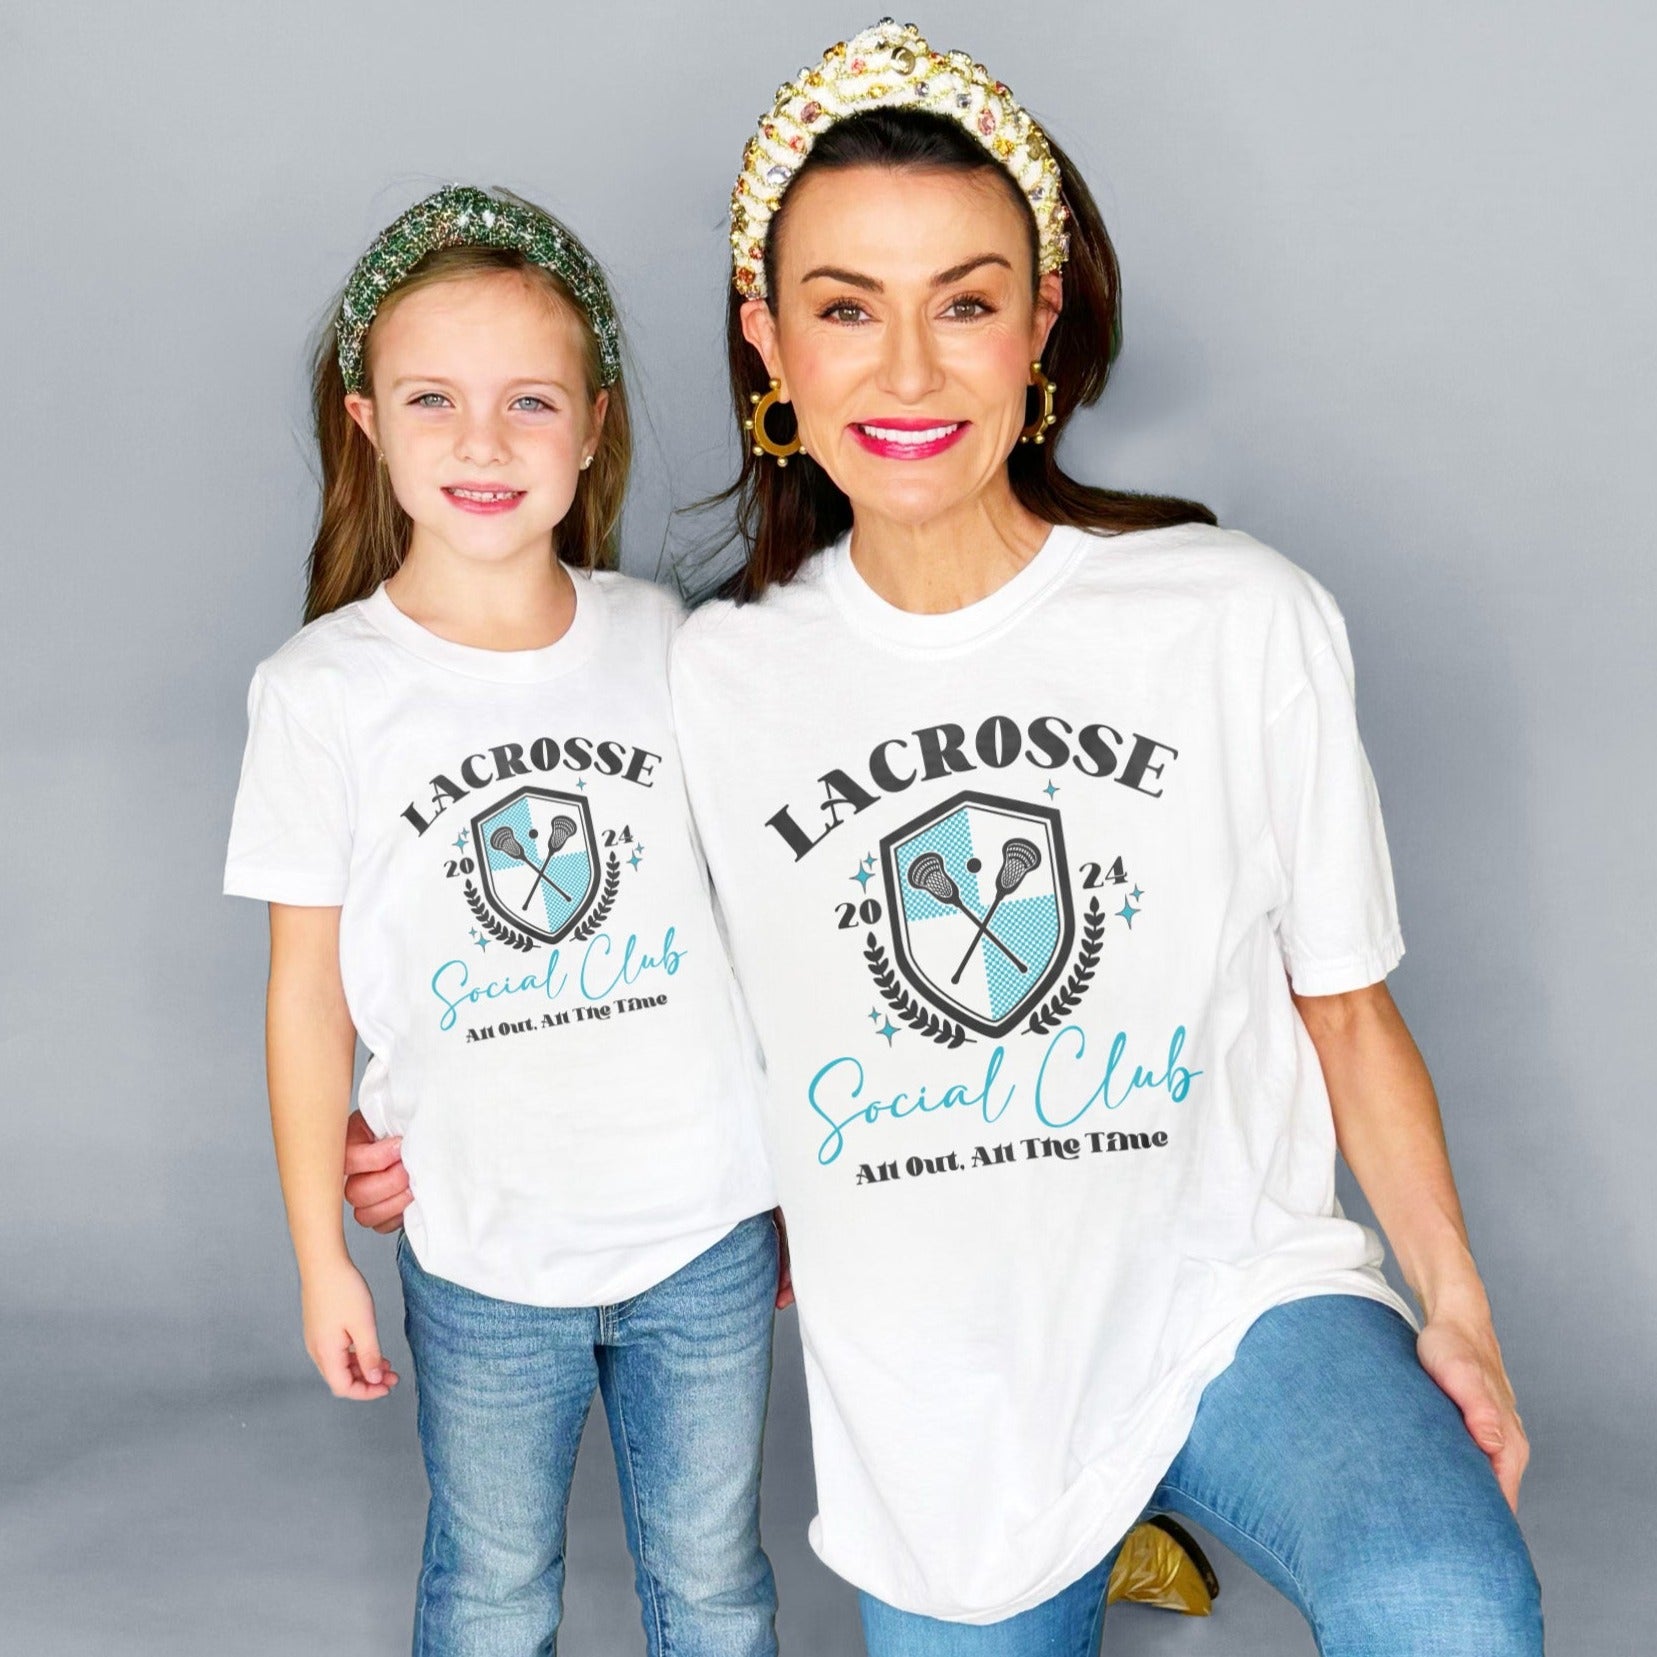 Lacrosse Social Club Youth and Adult Tee